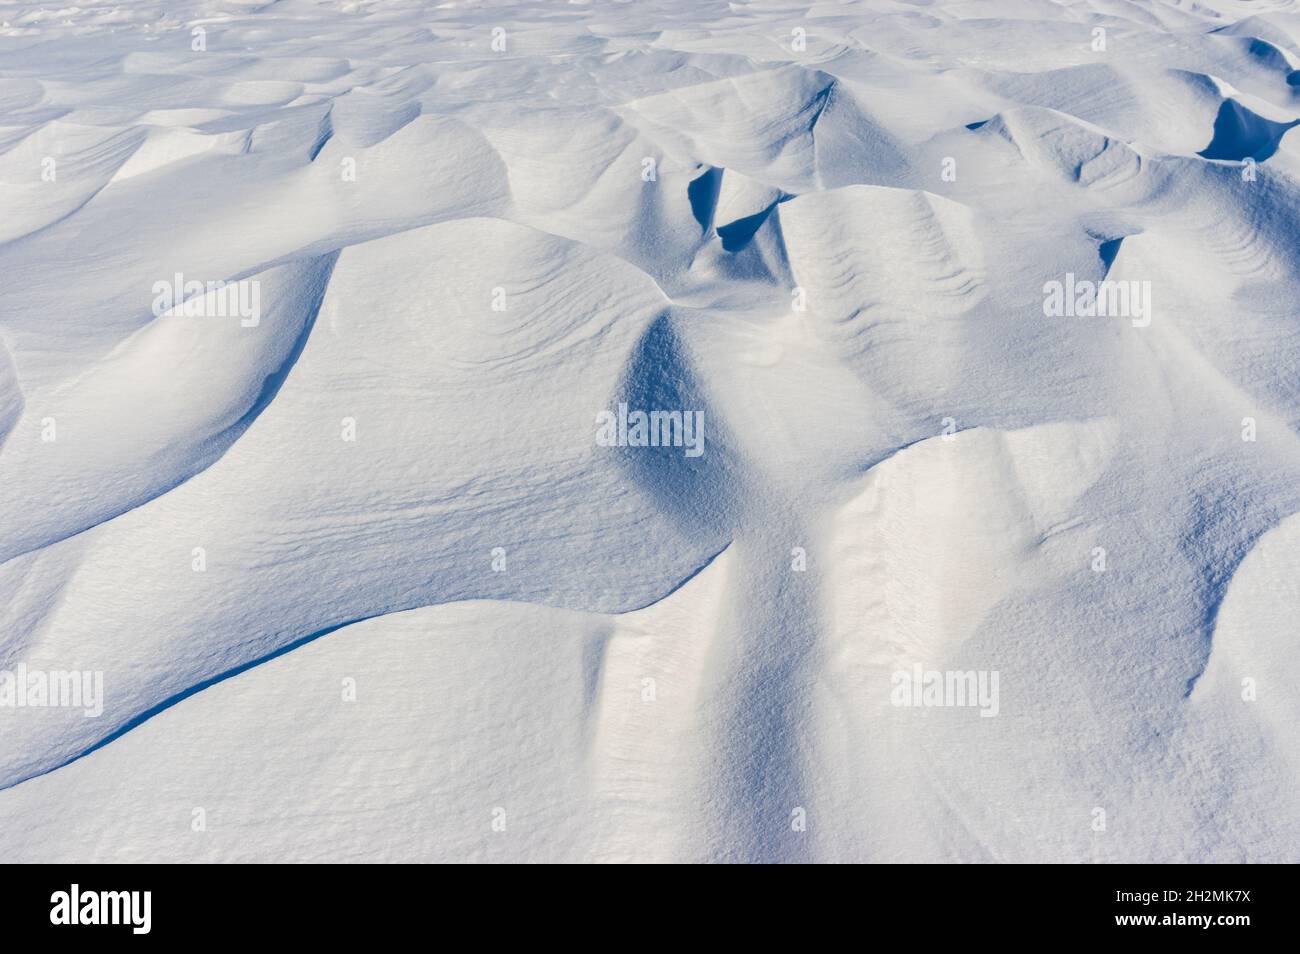 Landscape with snow shapes covering earth when windy weather at winter Stock Photo